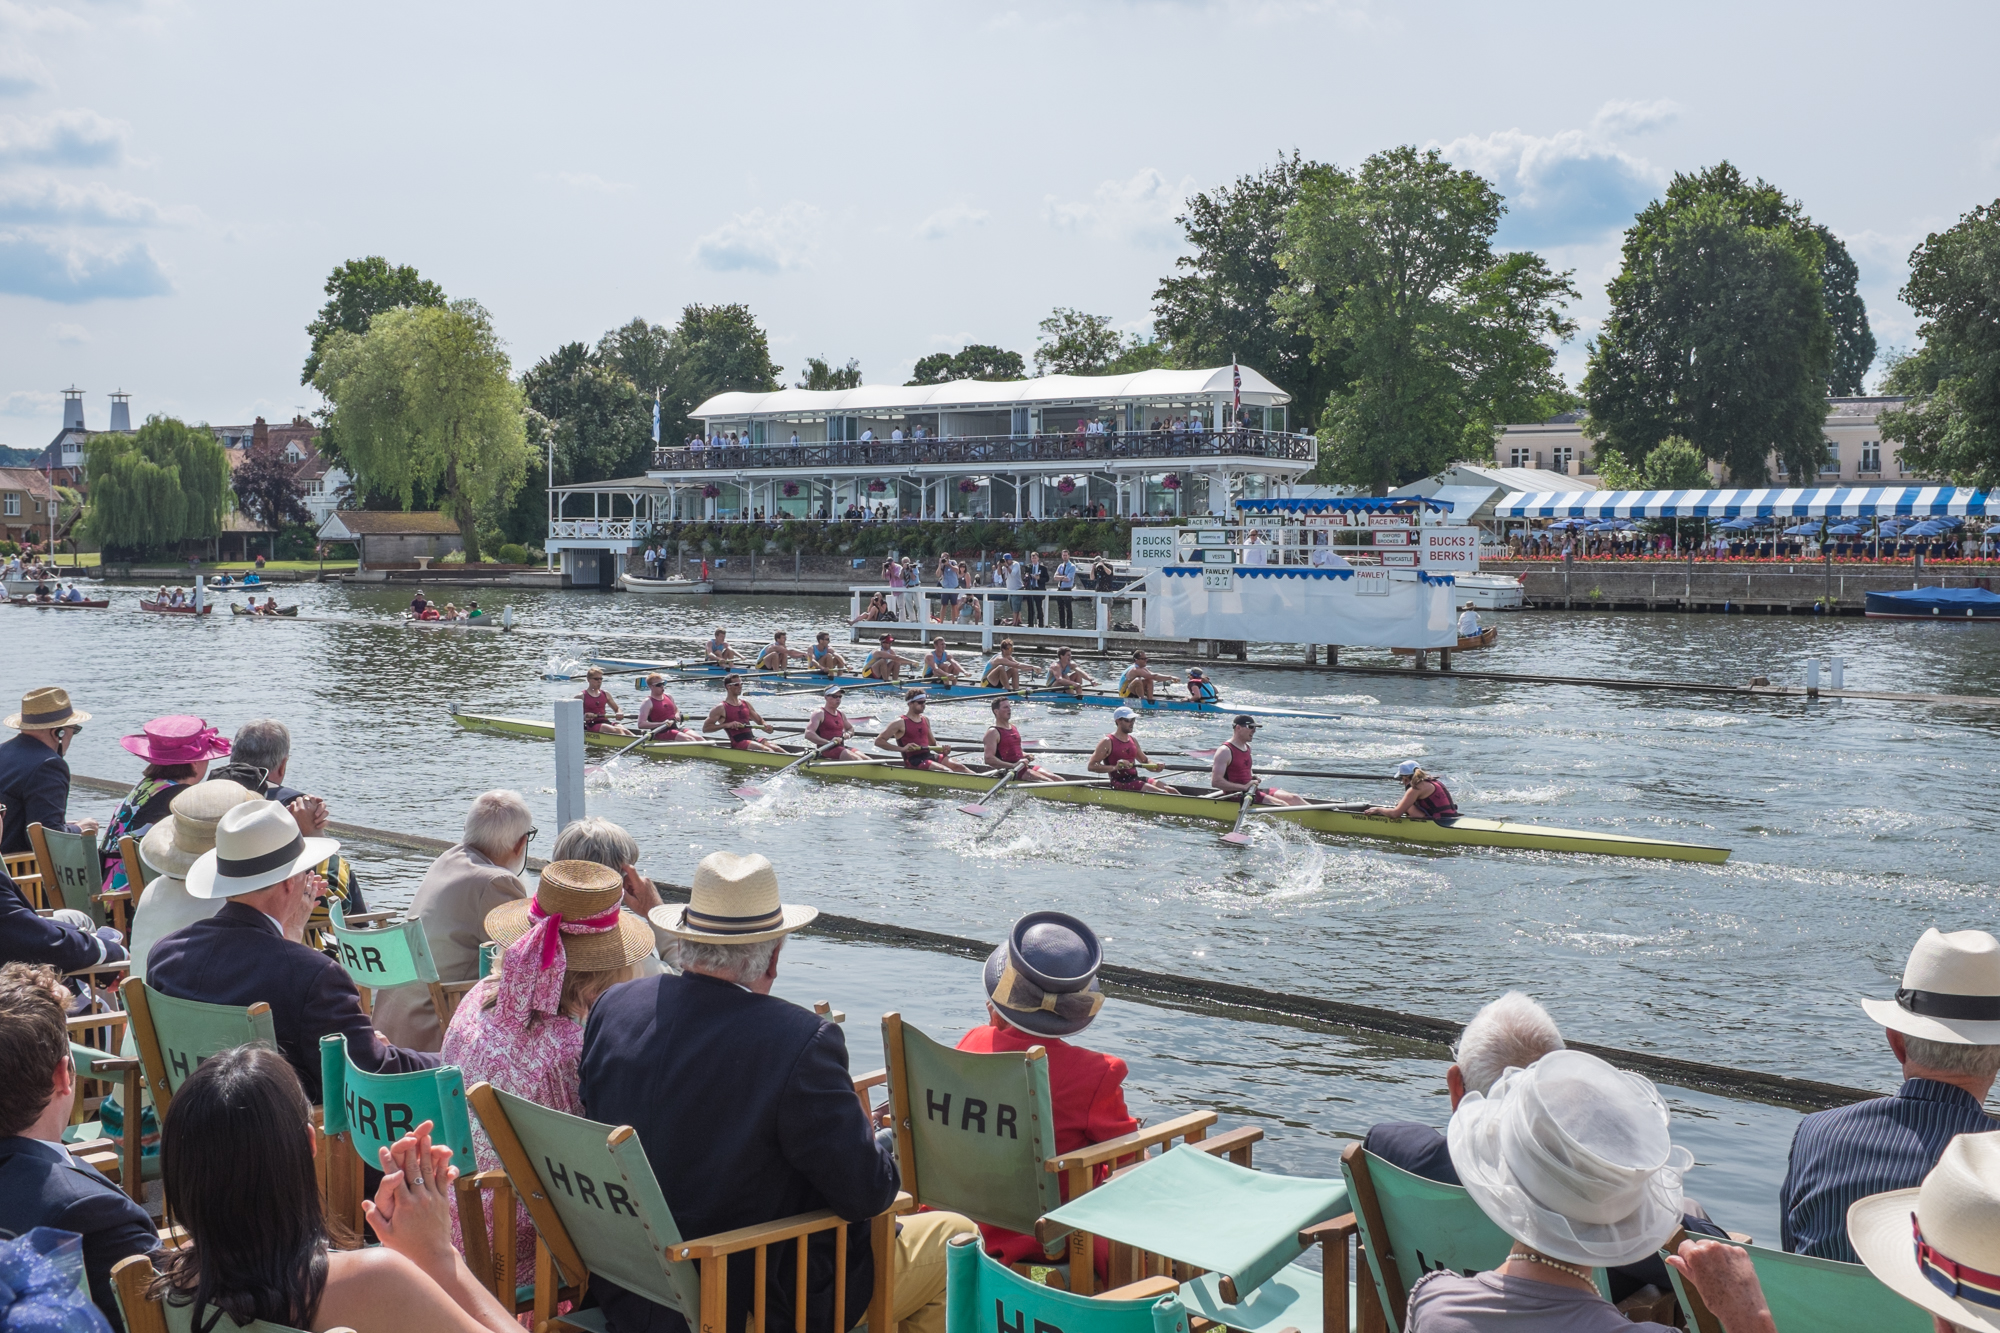  Crews from the Cambridge 99 Rowing Club and Vesta Rowing Club battle it out for a place in the next round of the Thames Challenge Cup at Henley Royal Regatta 